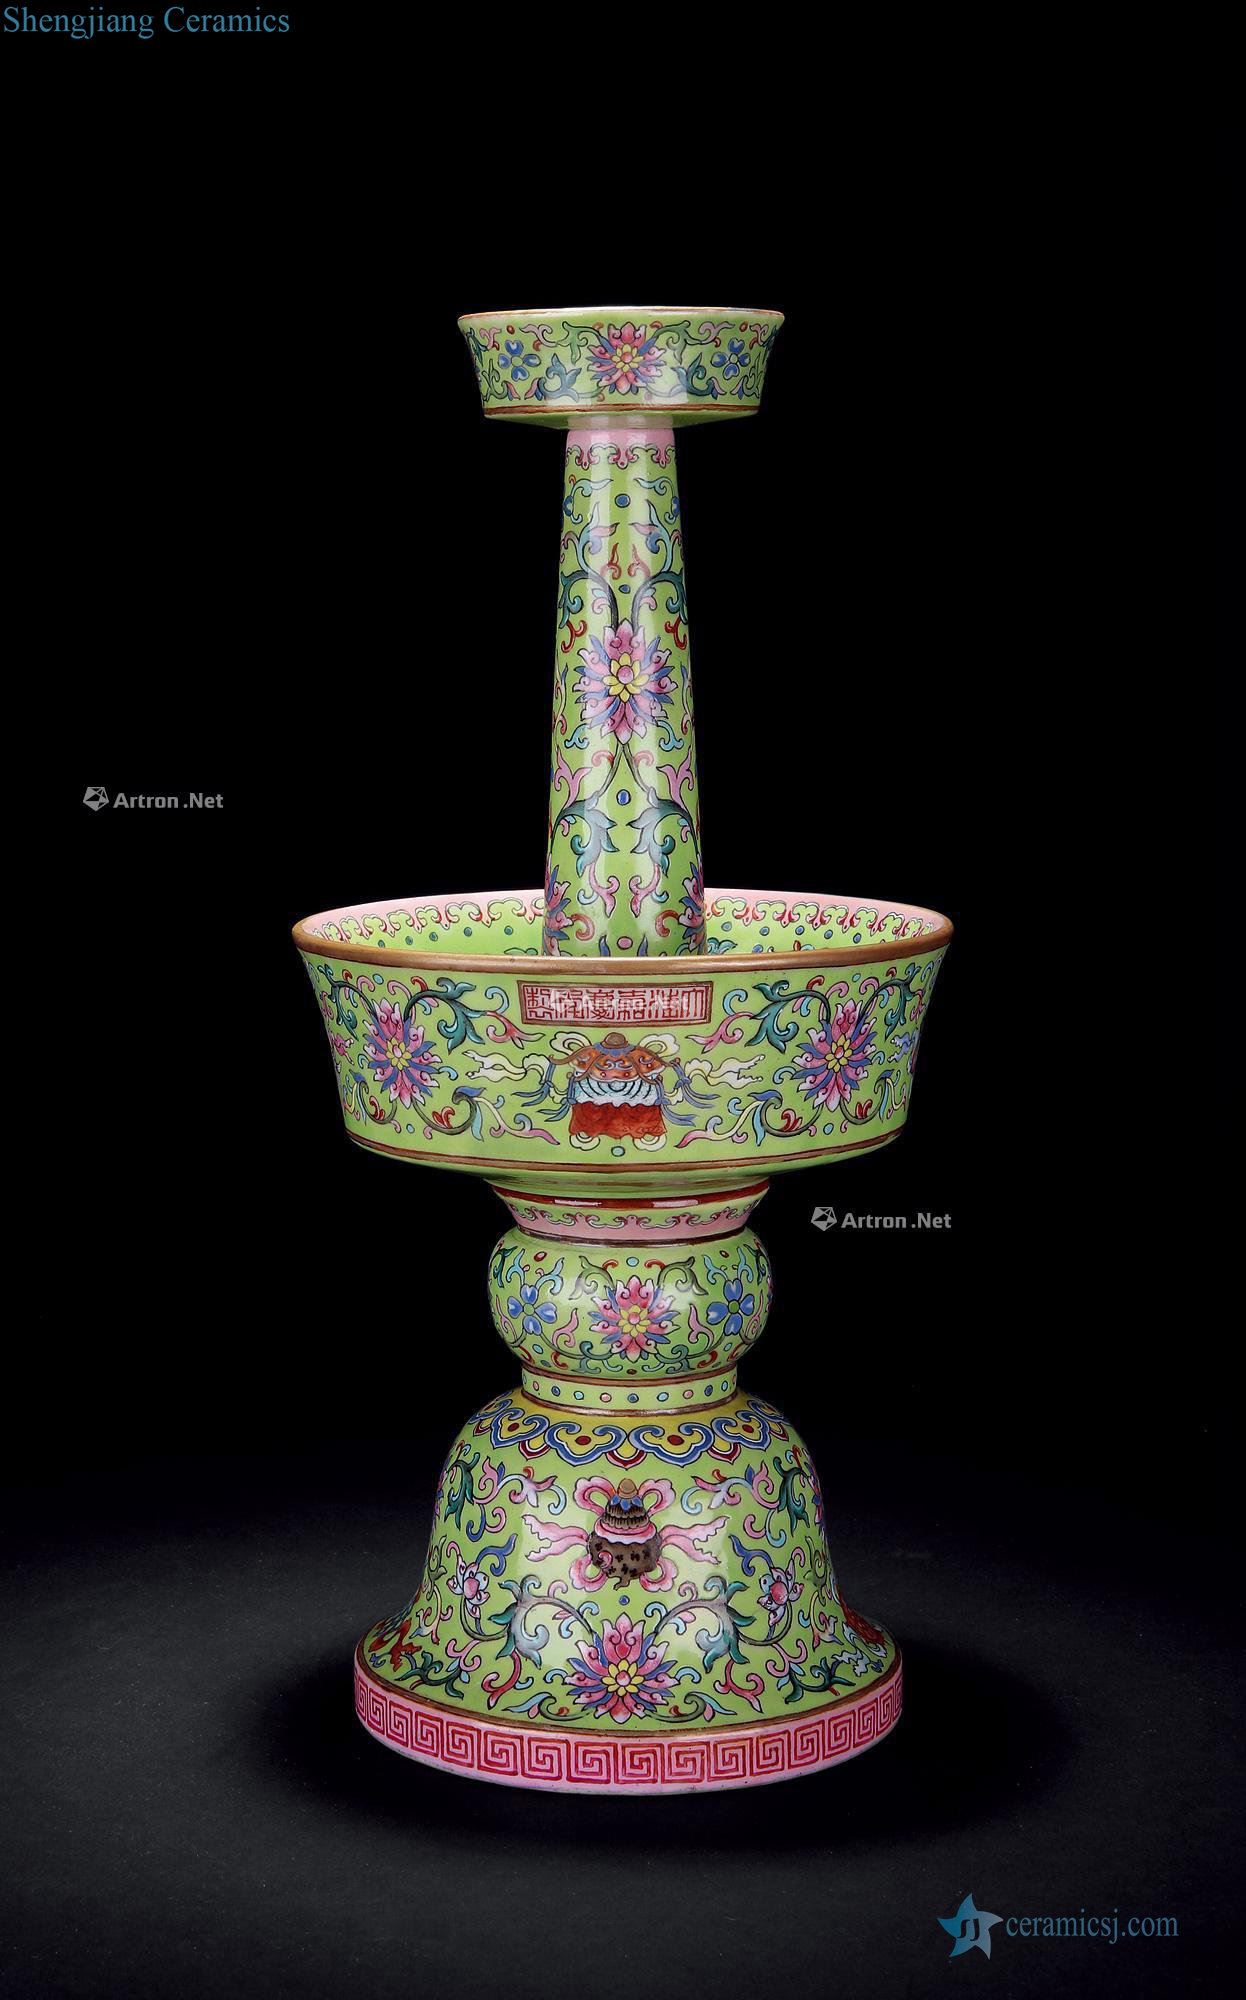 In the qing dynasty Qing jiaqing year pastel candlestick